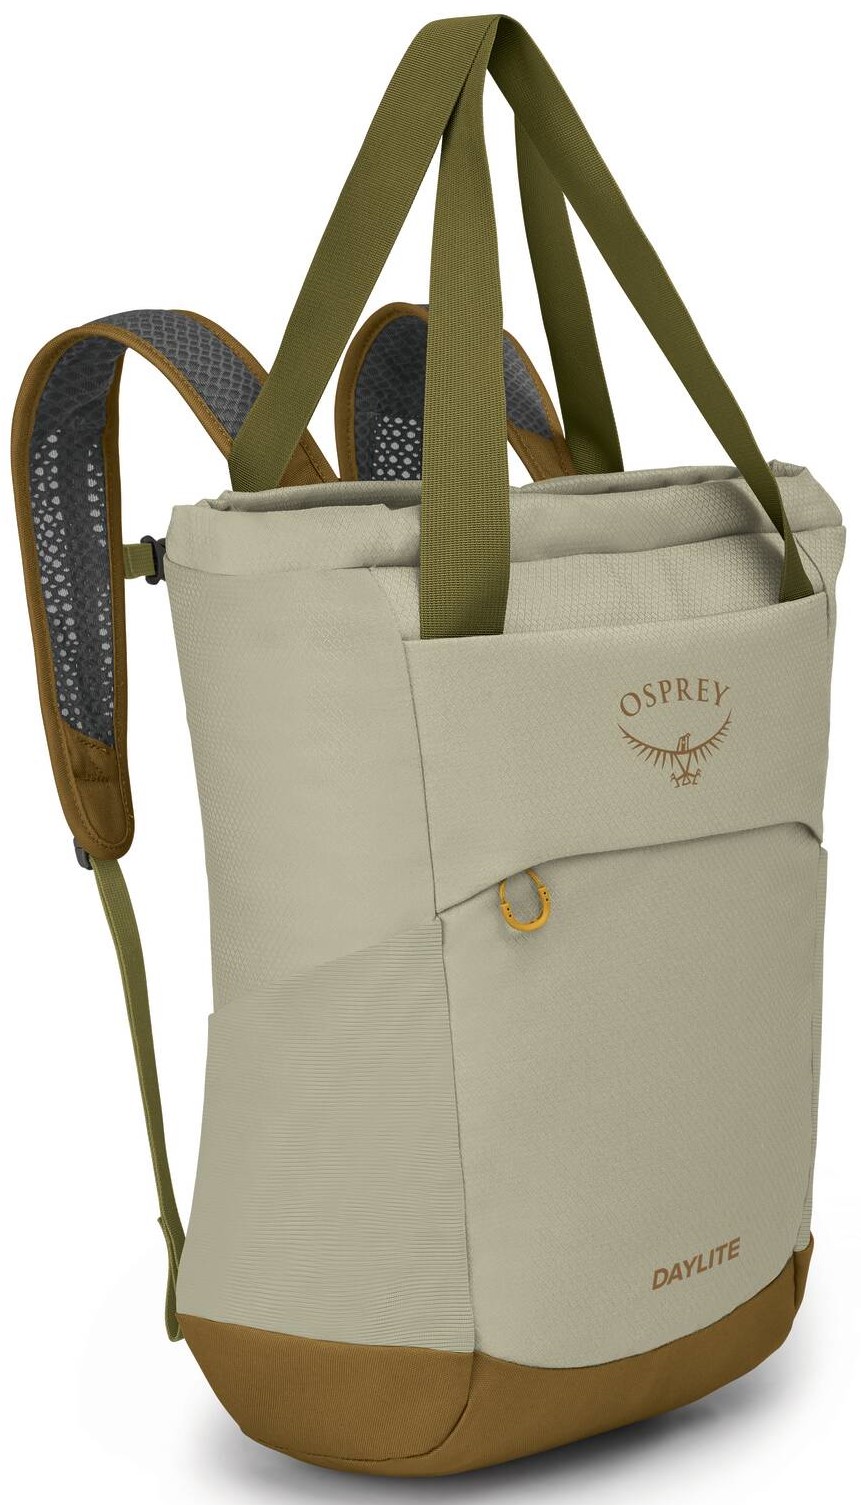 Osprey DAYLITE TOTE PACK meadow gray/histosol brown unisex batoh